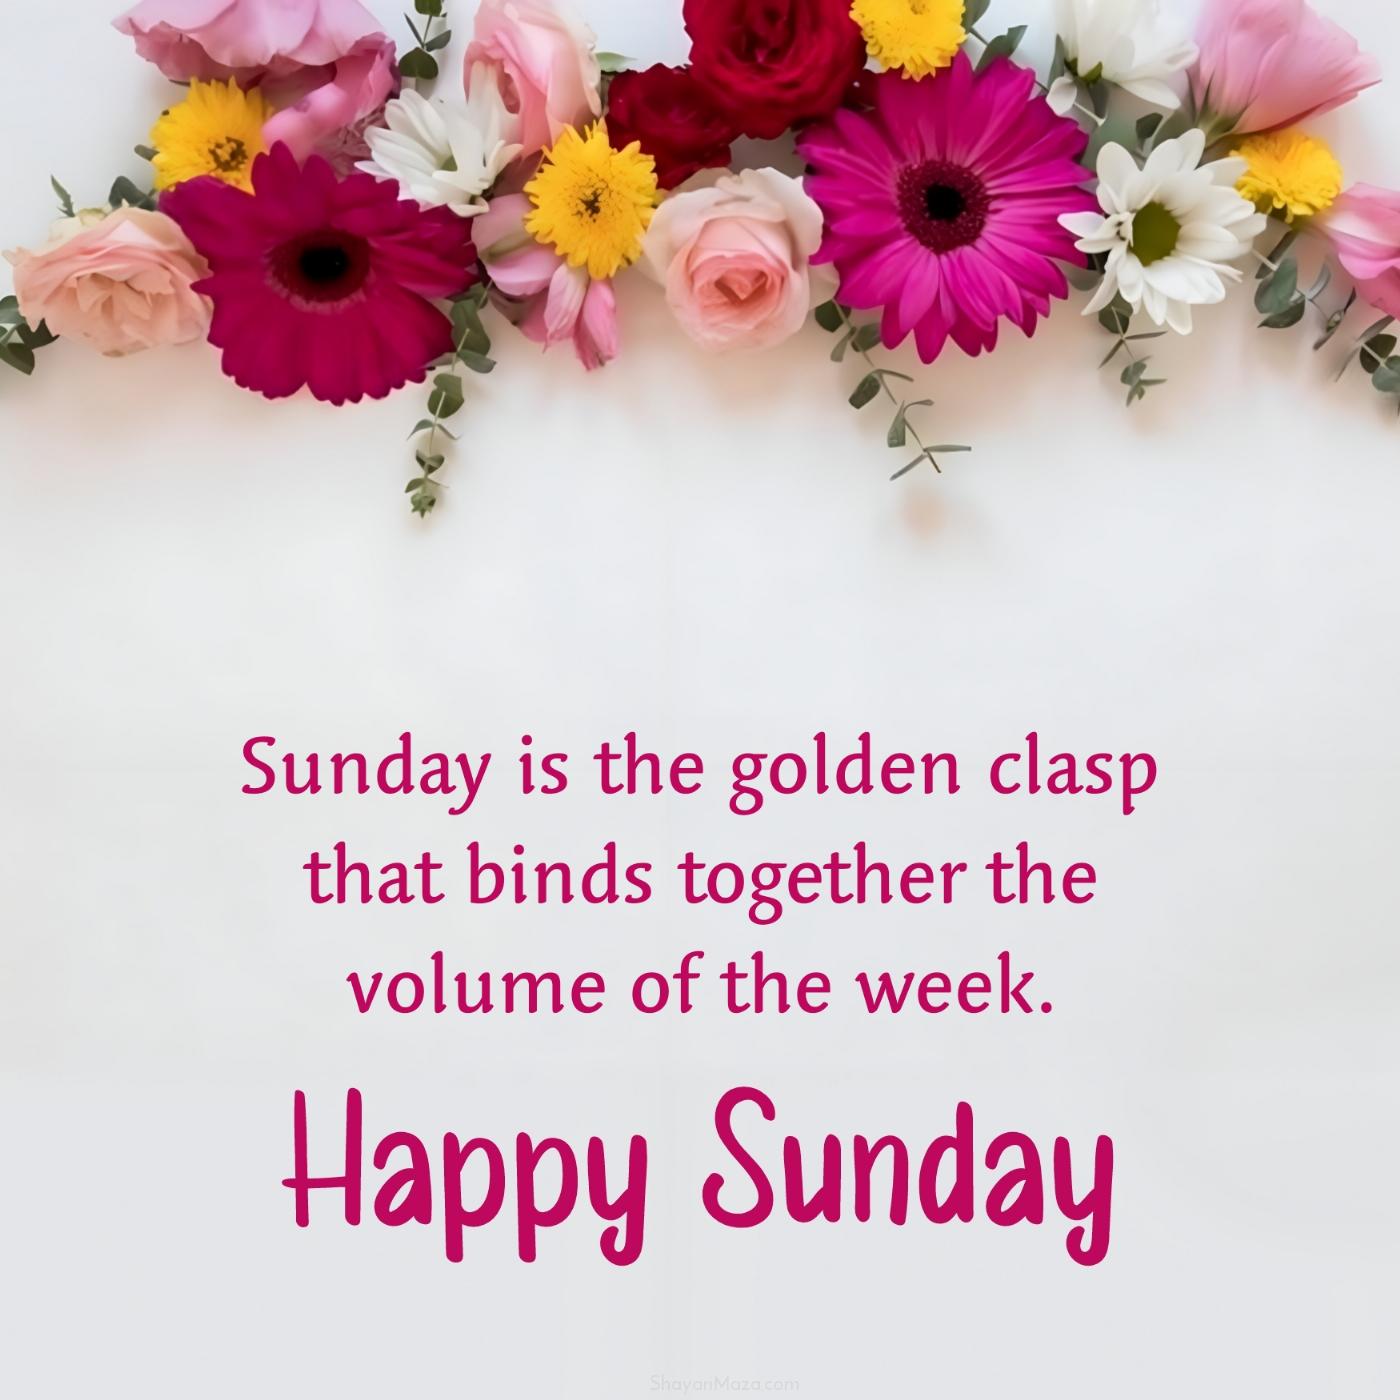 Sunday is the golden clasp that binds together the volume